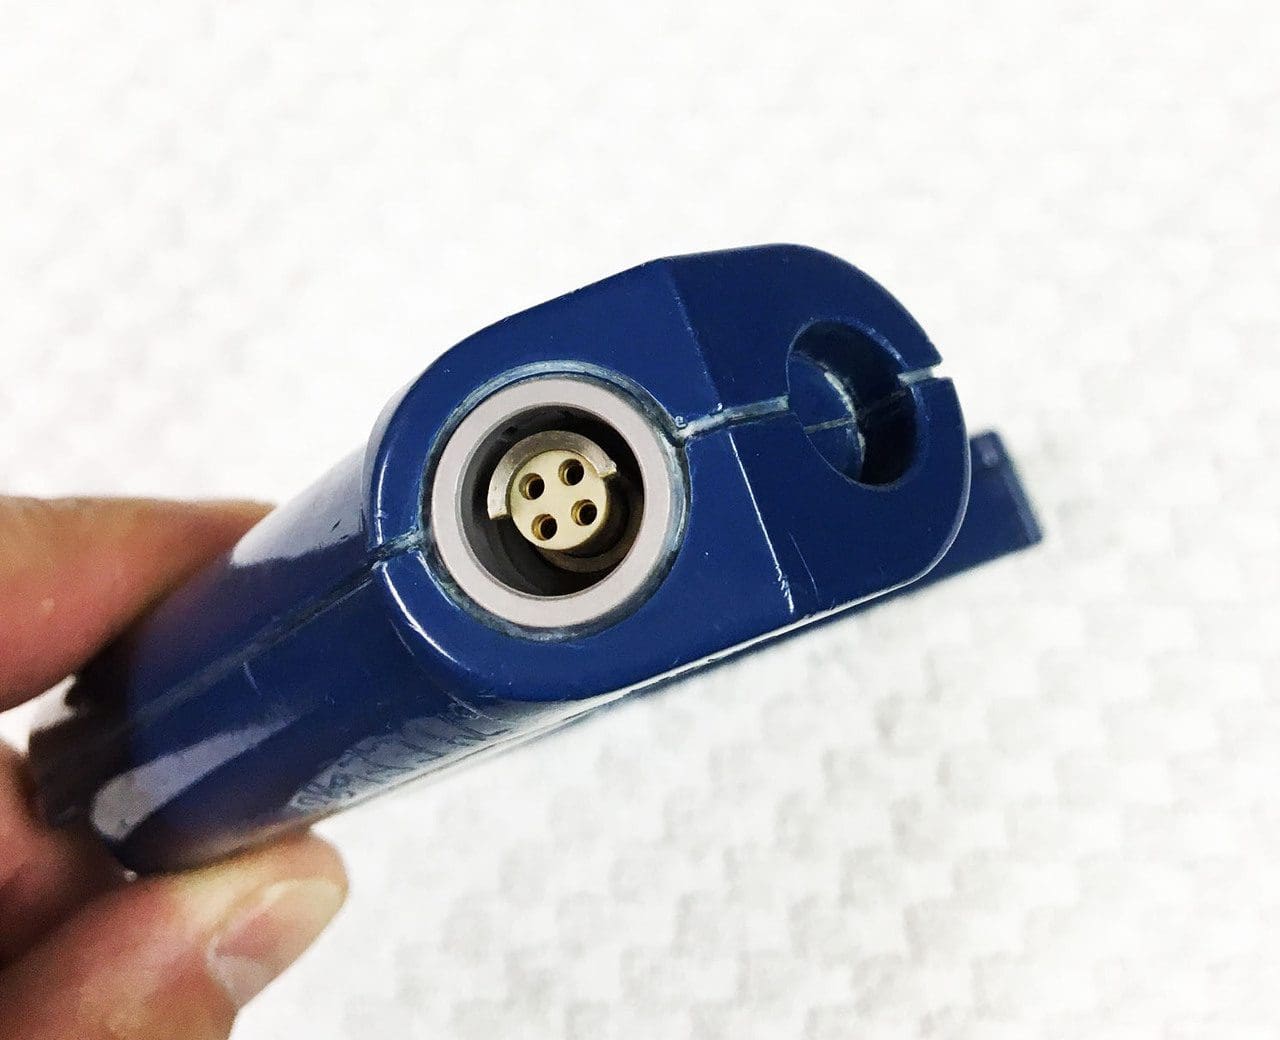 A person holding a blue cigarette lighter with a small hole in it.